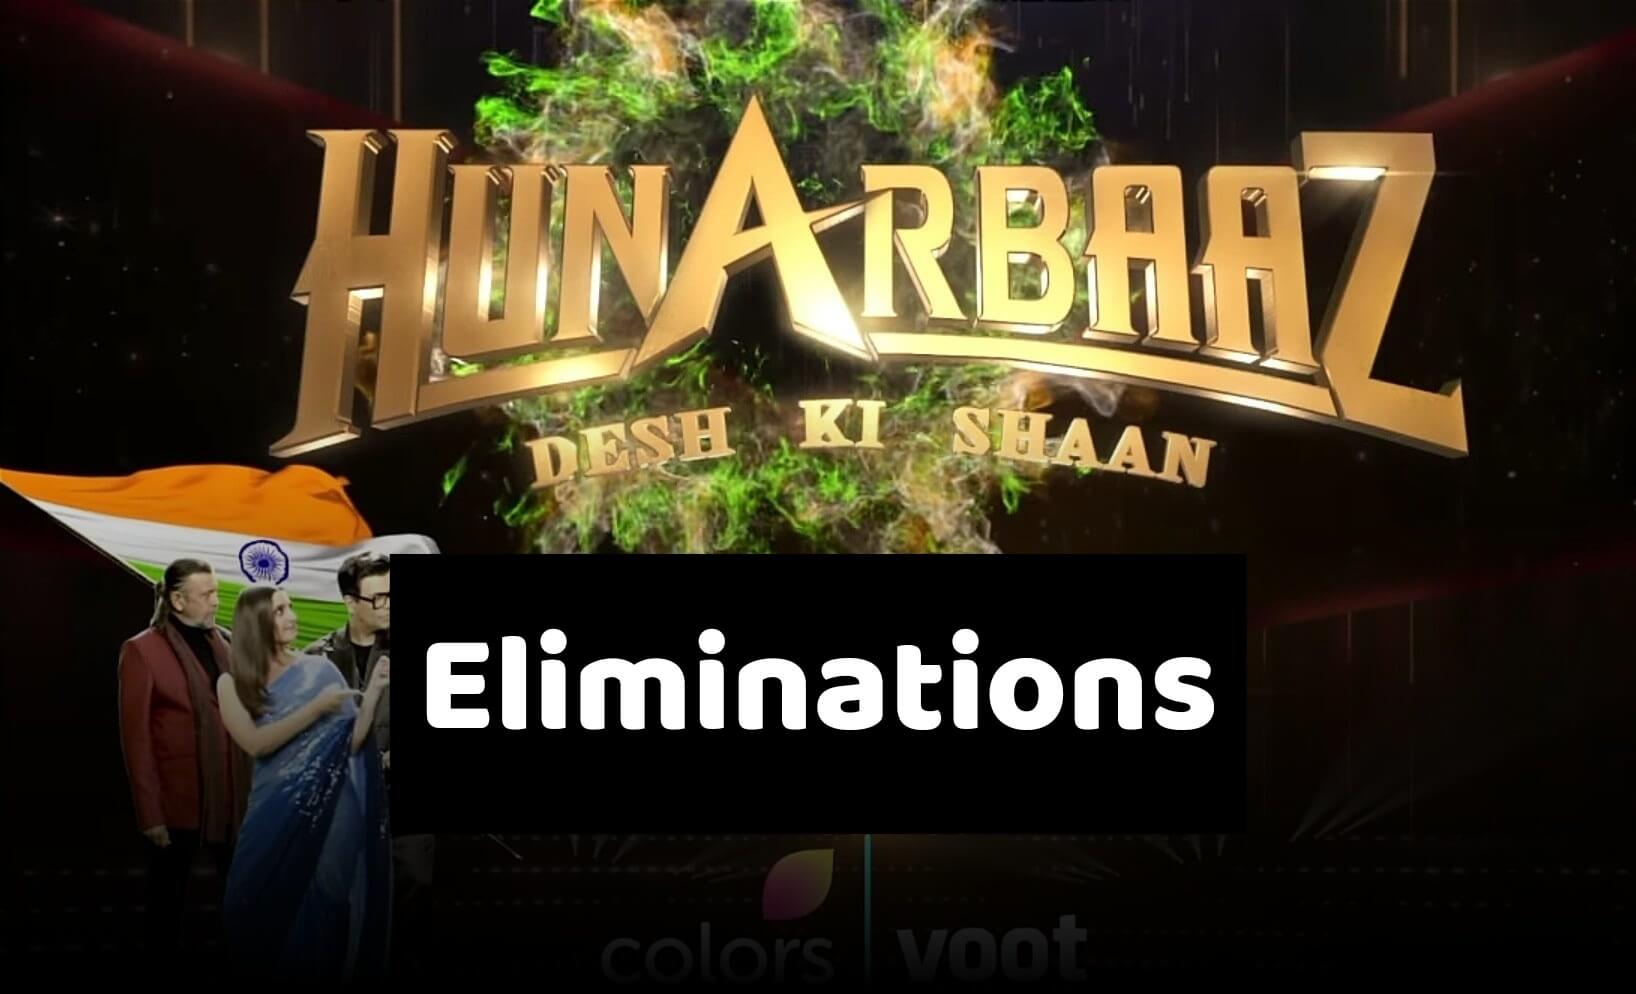 Hunarbaaz-Elimination-Today-On-Colors-TV-Indian-Show-Who-Got-Eliminated-From-Hunarbaaz-Reality-Show